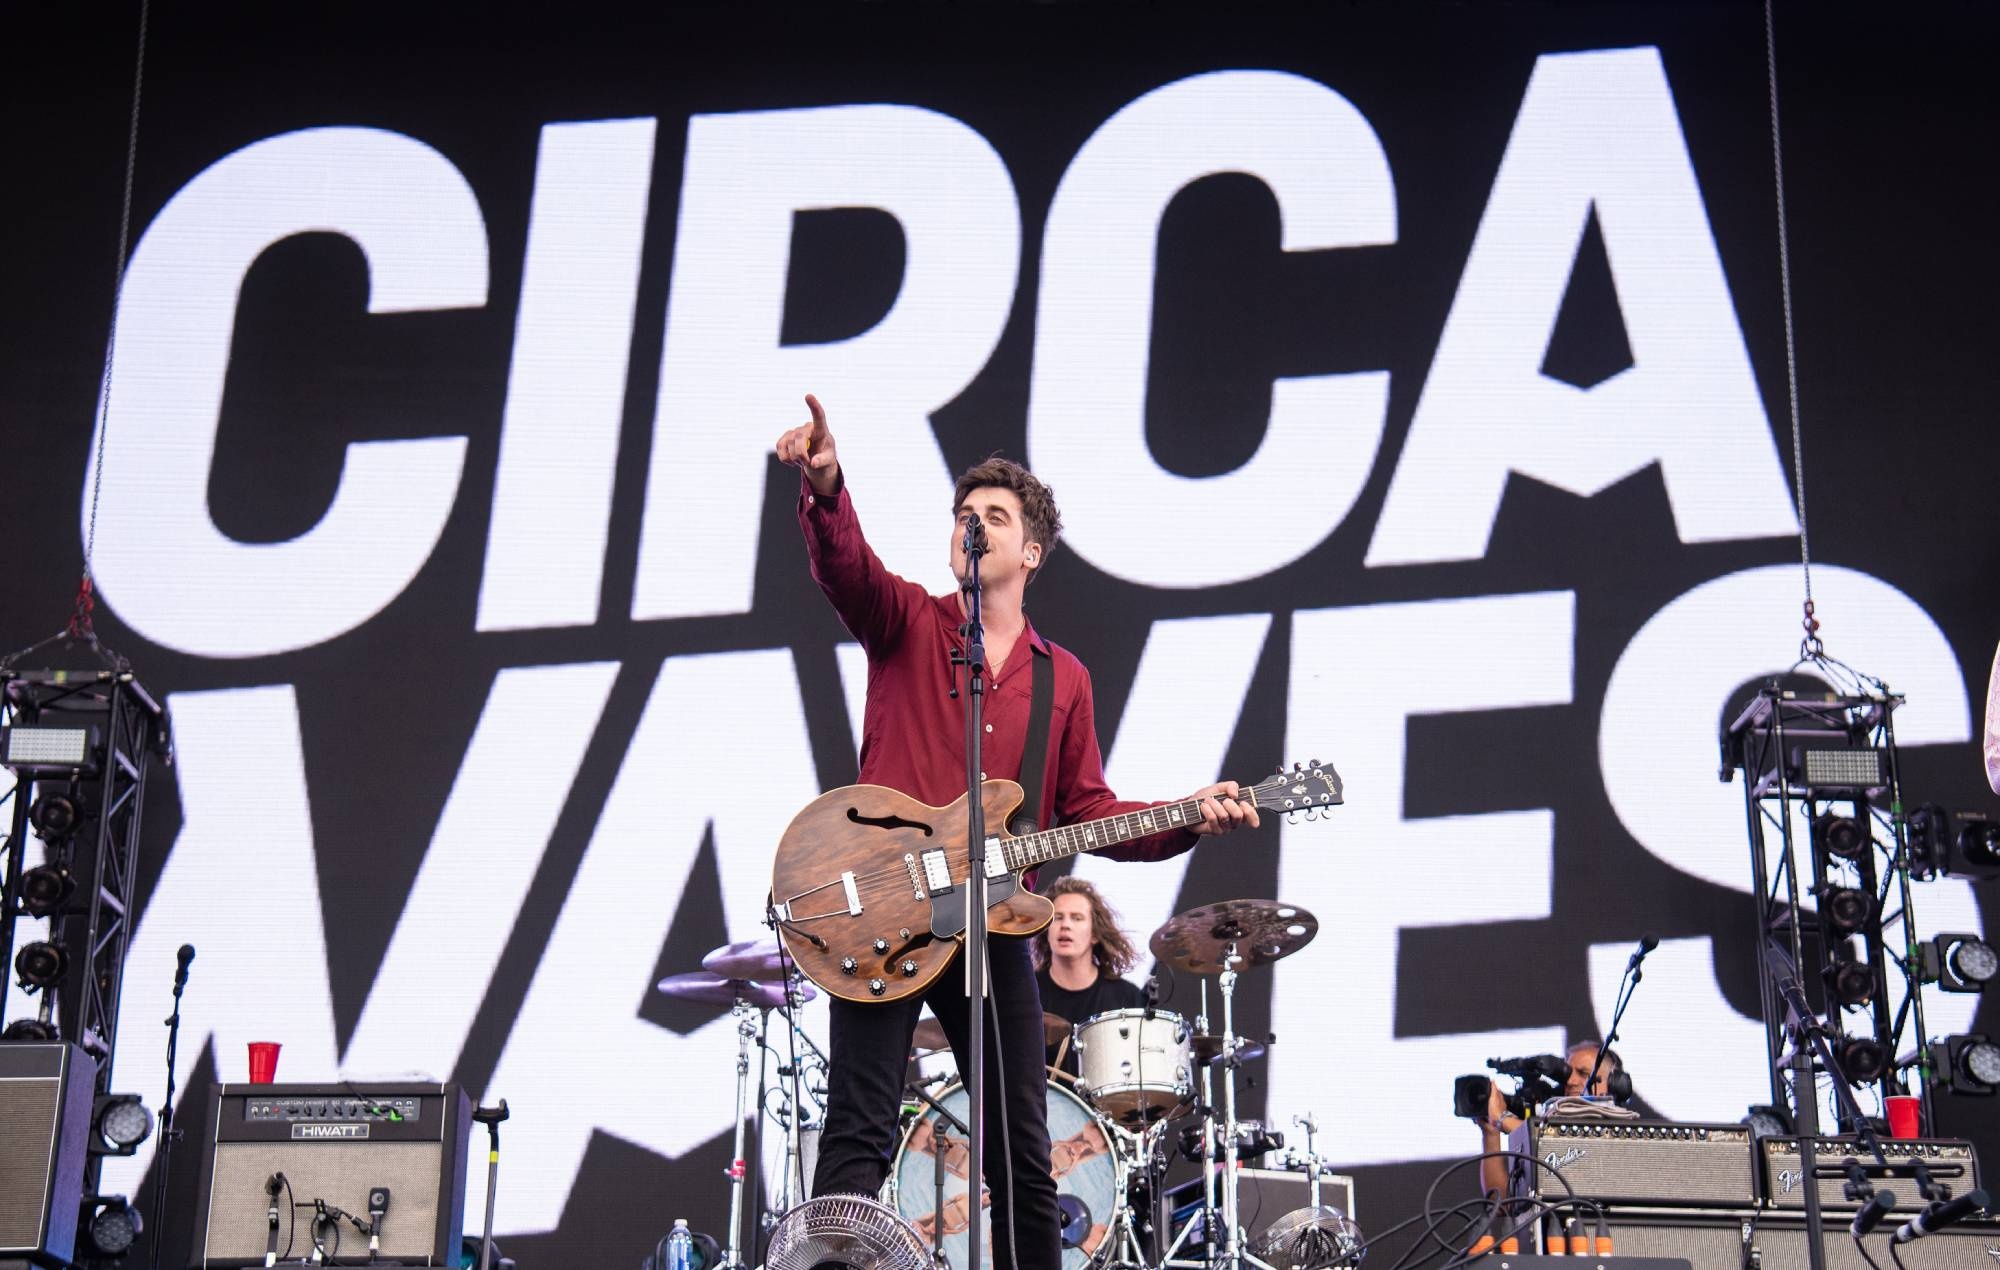 Circa Waves announce rescheduled UK tour dates for August 2021 2000x1270